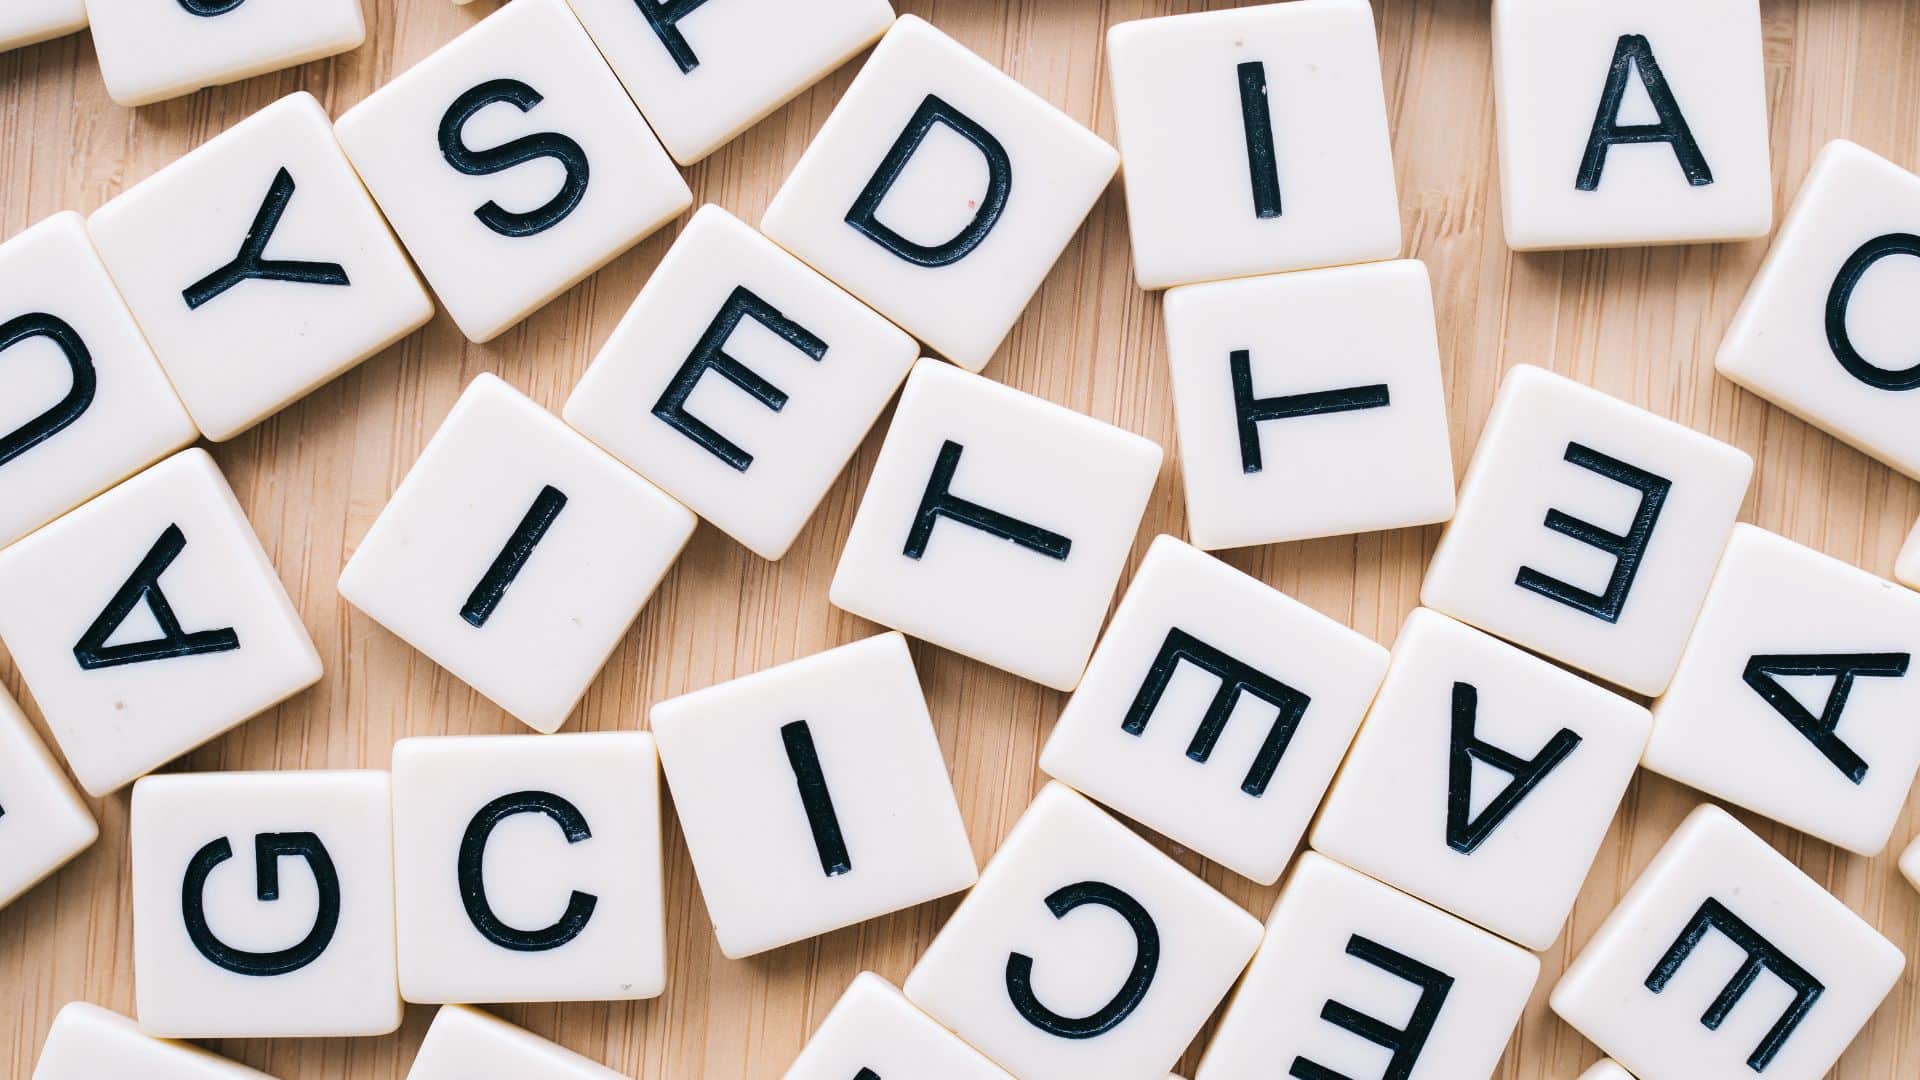 Ever wonder what a lot of those nursing abbreviations and acronyms mean? Find out here!